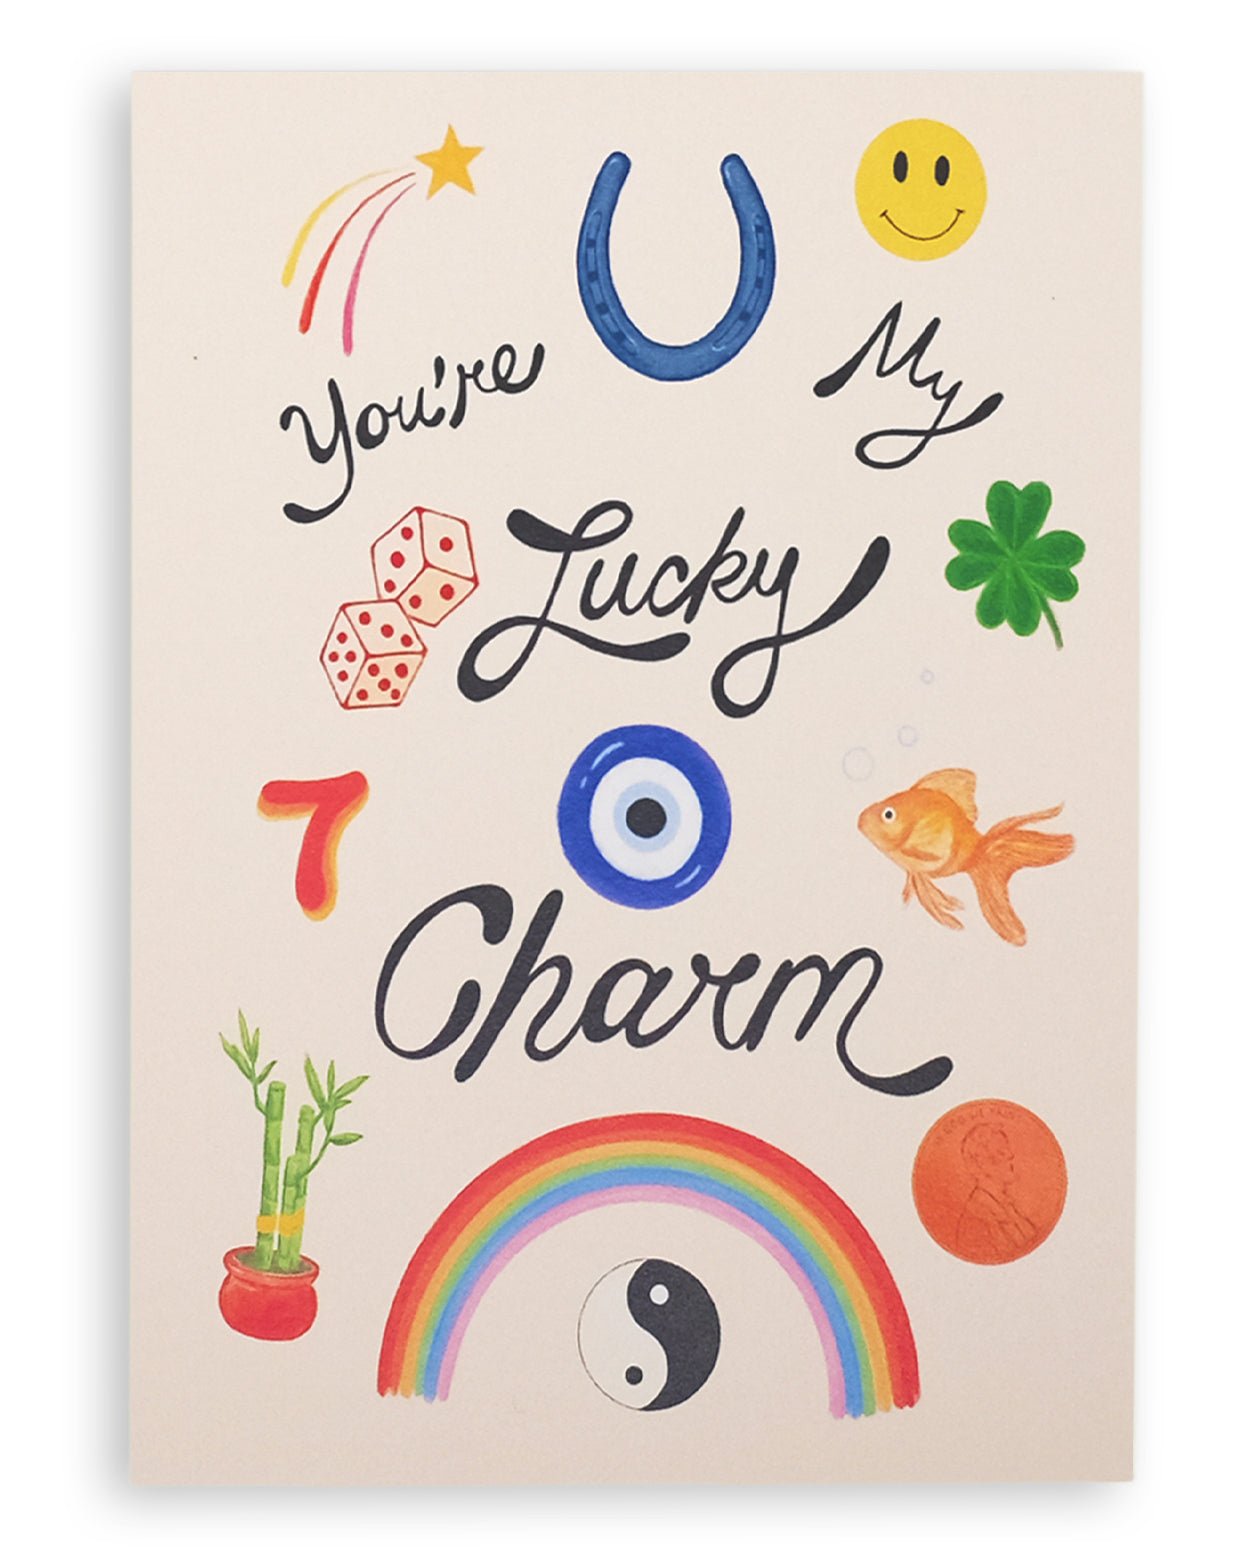 Cream colored card with various lucky items on the front: penny, goldfish, four leaf clover, dice, the number seven, bamboo plant, yin and yang, rainbow, horseshoe, shooting star, and smiley face with the words &quot;You&#39;re My Lucky Charm&quot; printed on cardstock. Shown on white background.